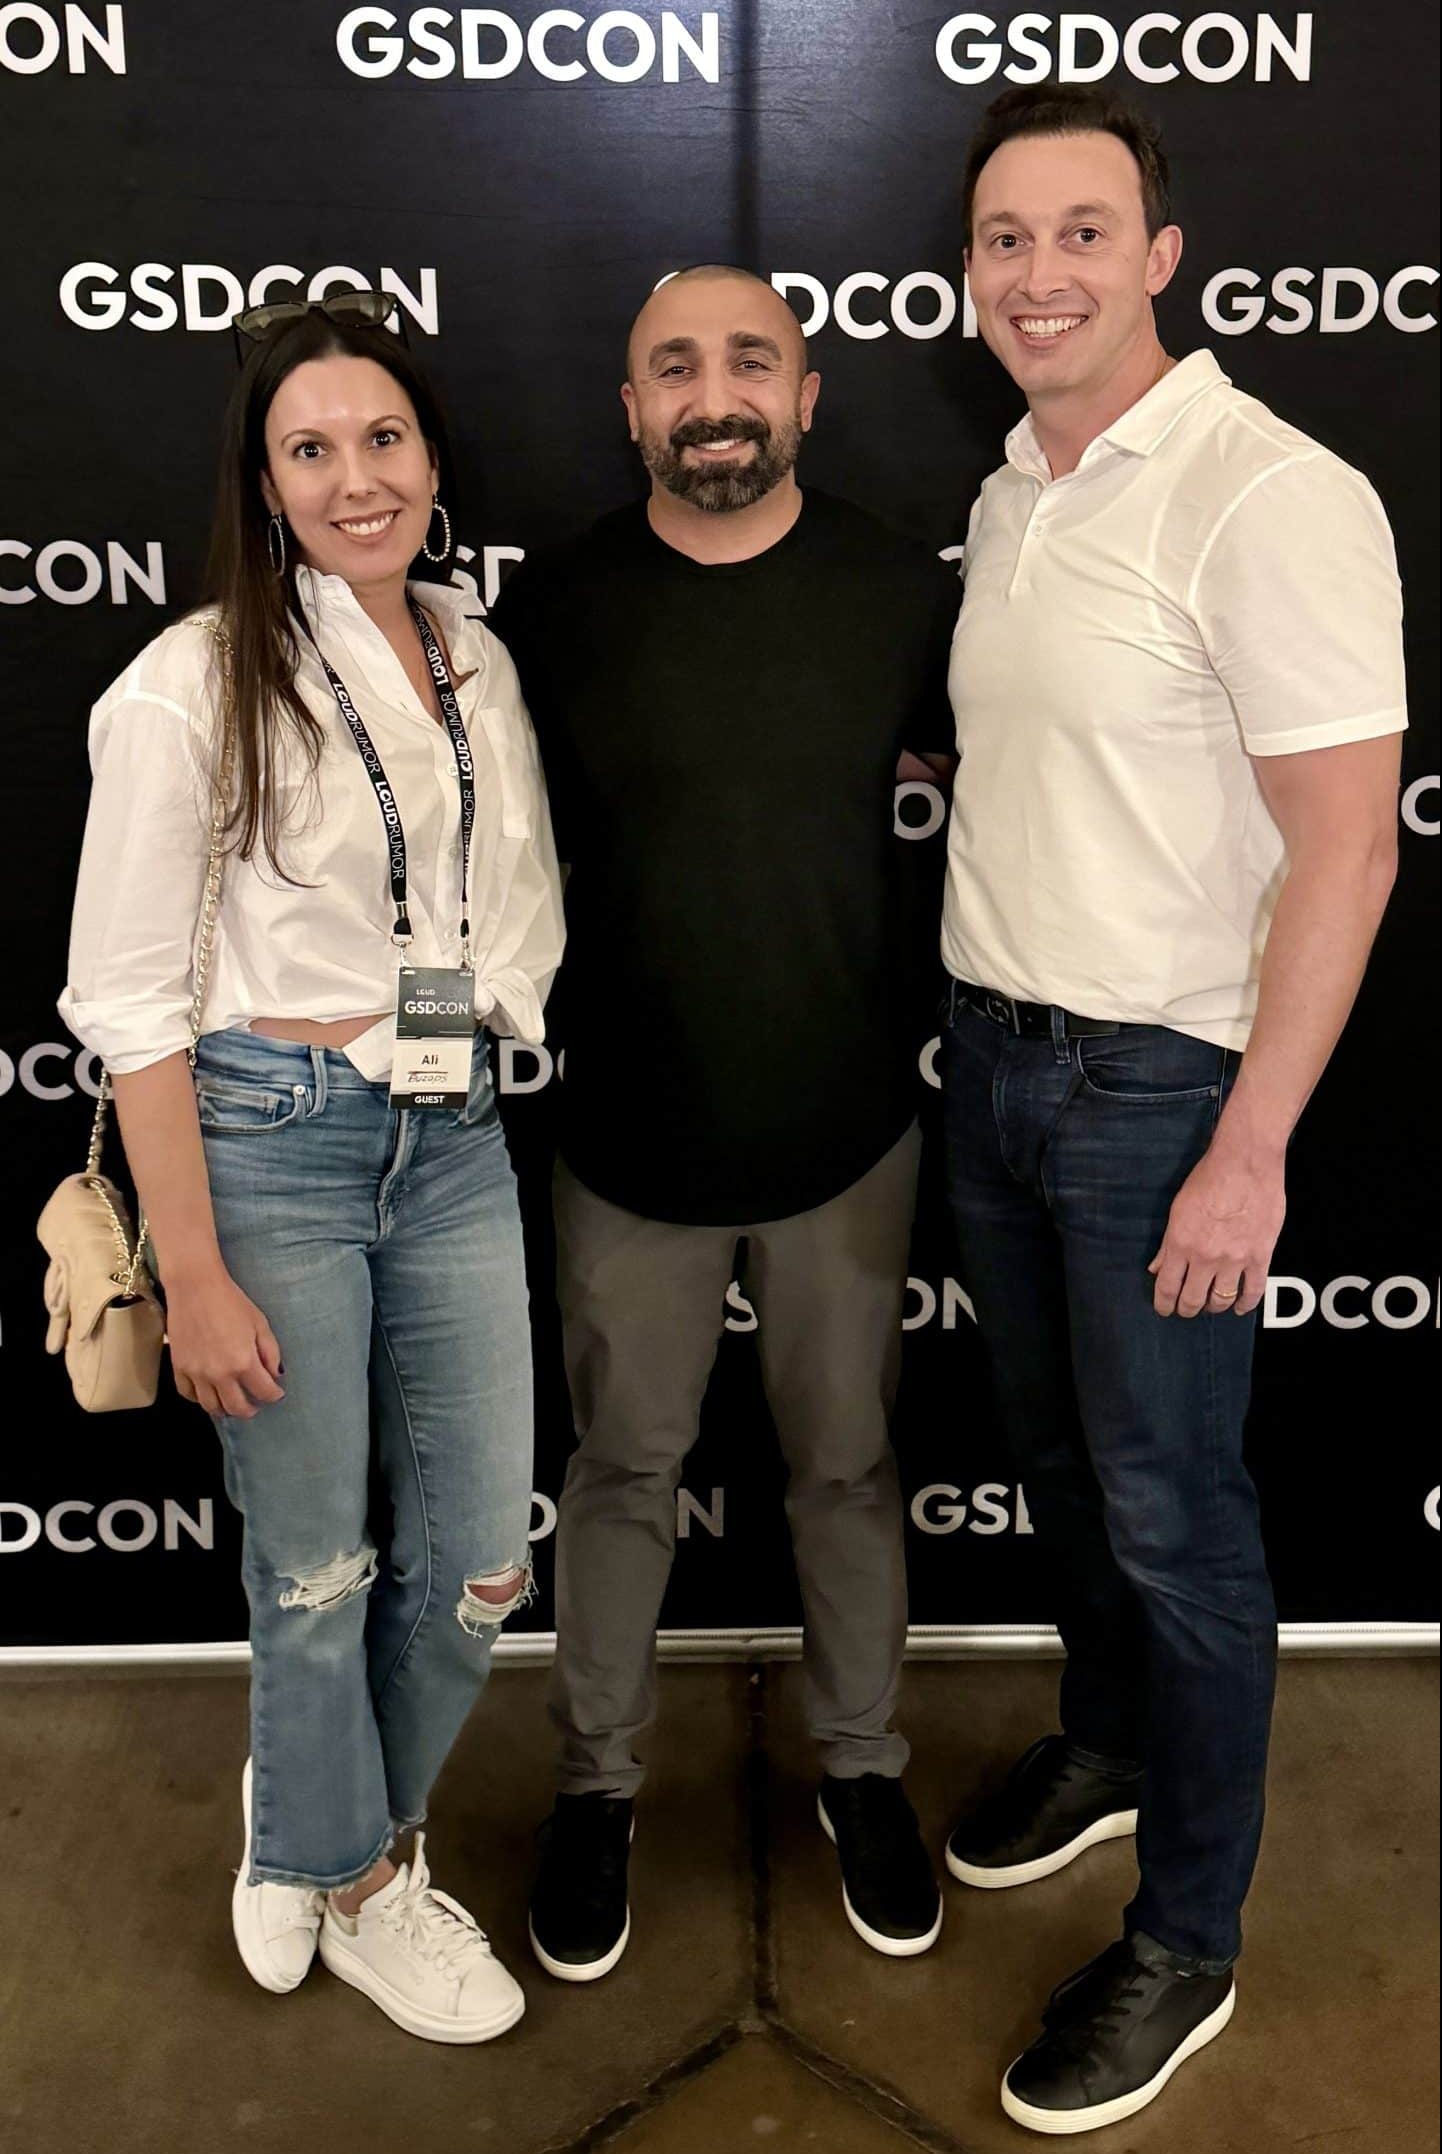 In the image from left to right: Ali Benso-Director of Marketing at Buzops, Mike Arce-CEO and Founder of Loud Rumor, and Michael Benso-Co-founder of Buzops. The Most effective path to mastering your gym business